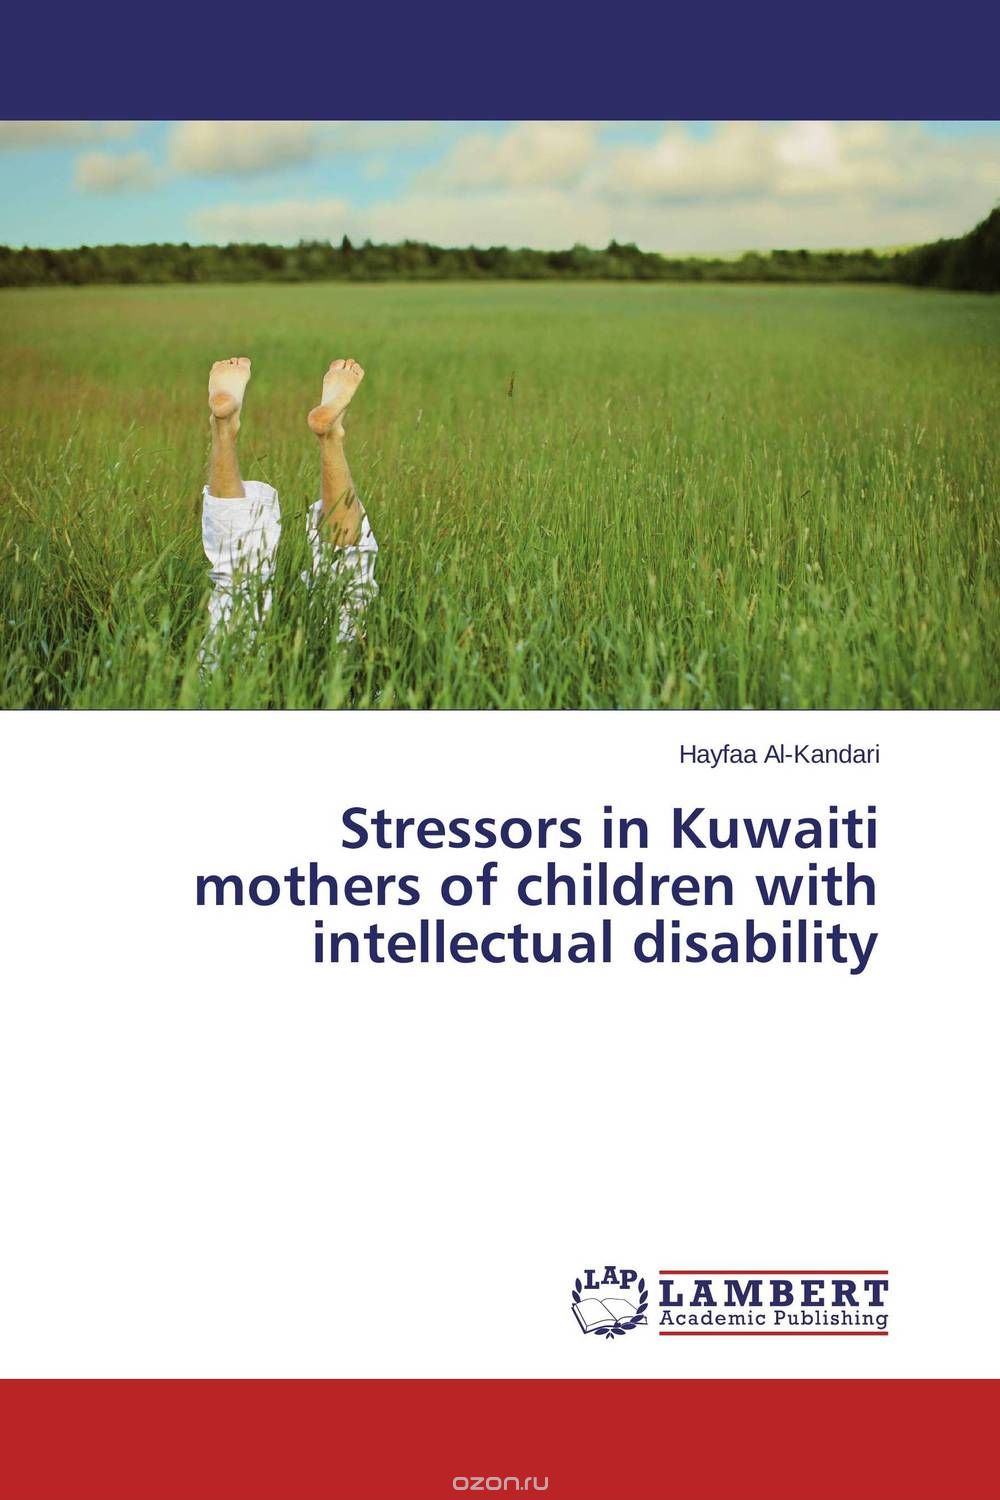 Скачать книгу "Stressors in Kuwaiti mothers of children with intellectual disability"